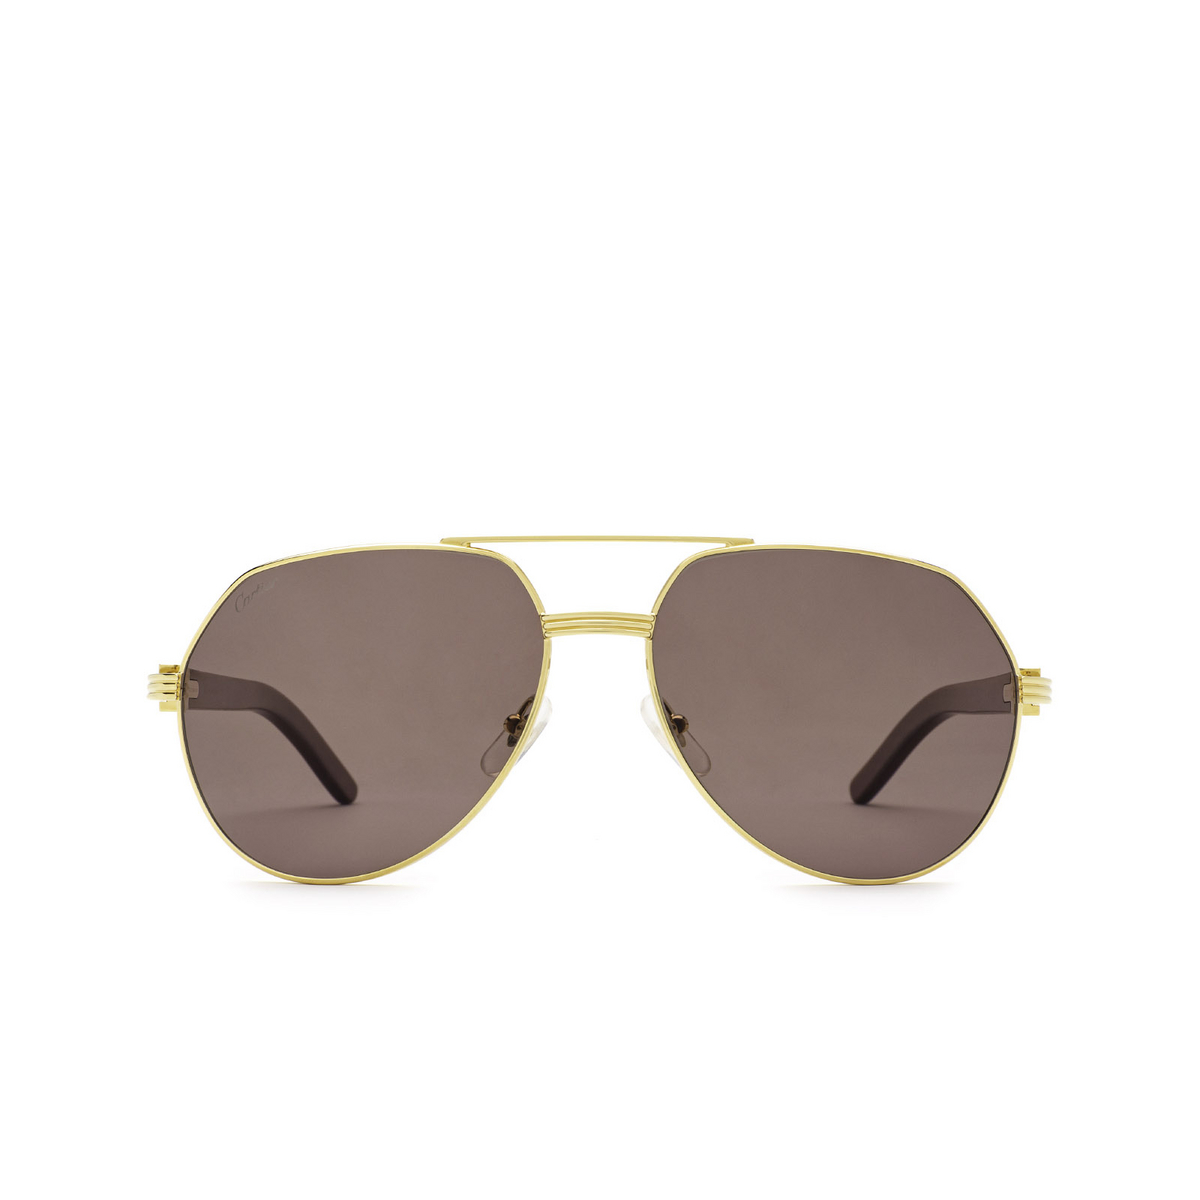 Cartier® Irregular Sunglasses: CT0272S color Gold & Burgundy 004 - front view.